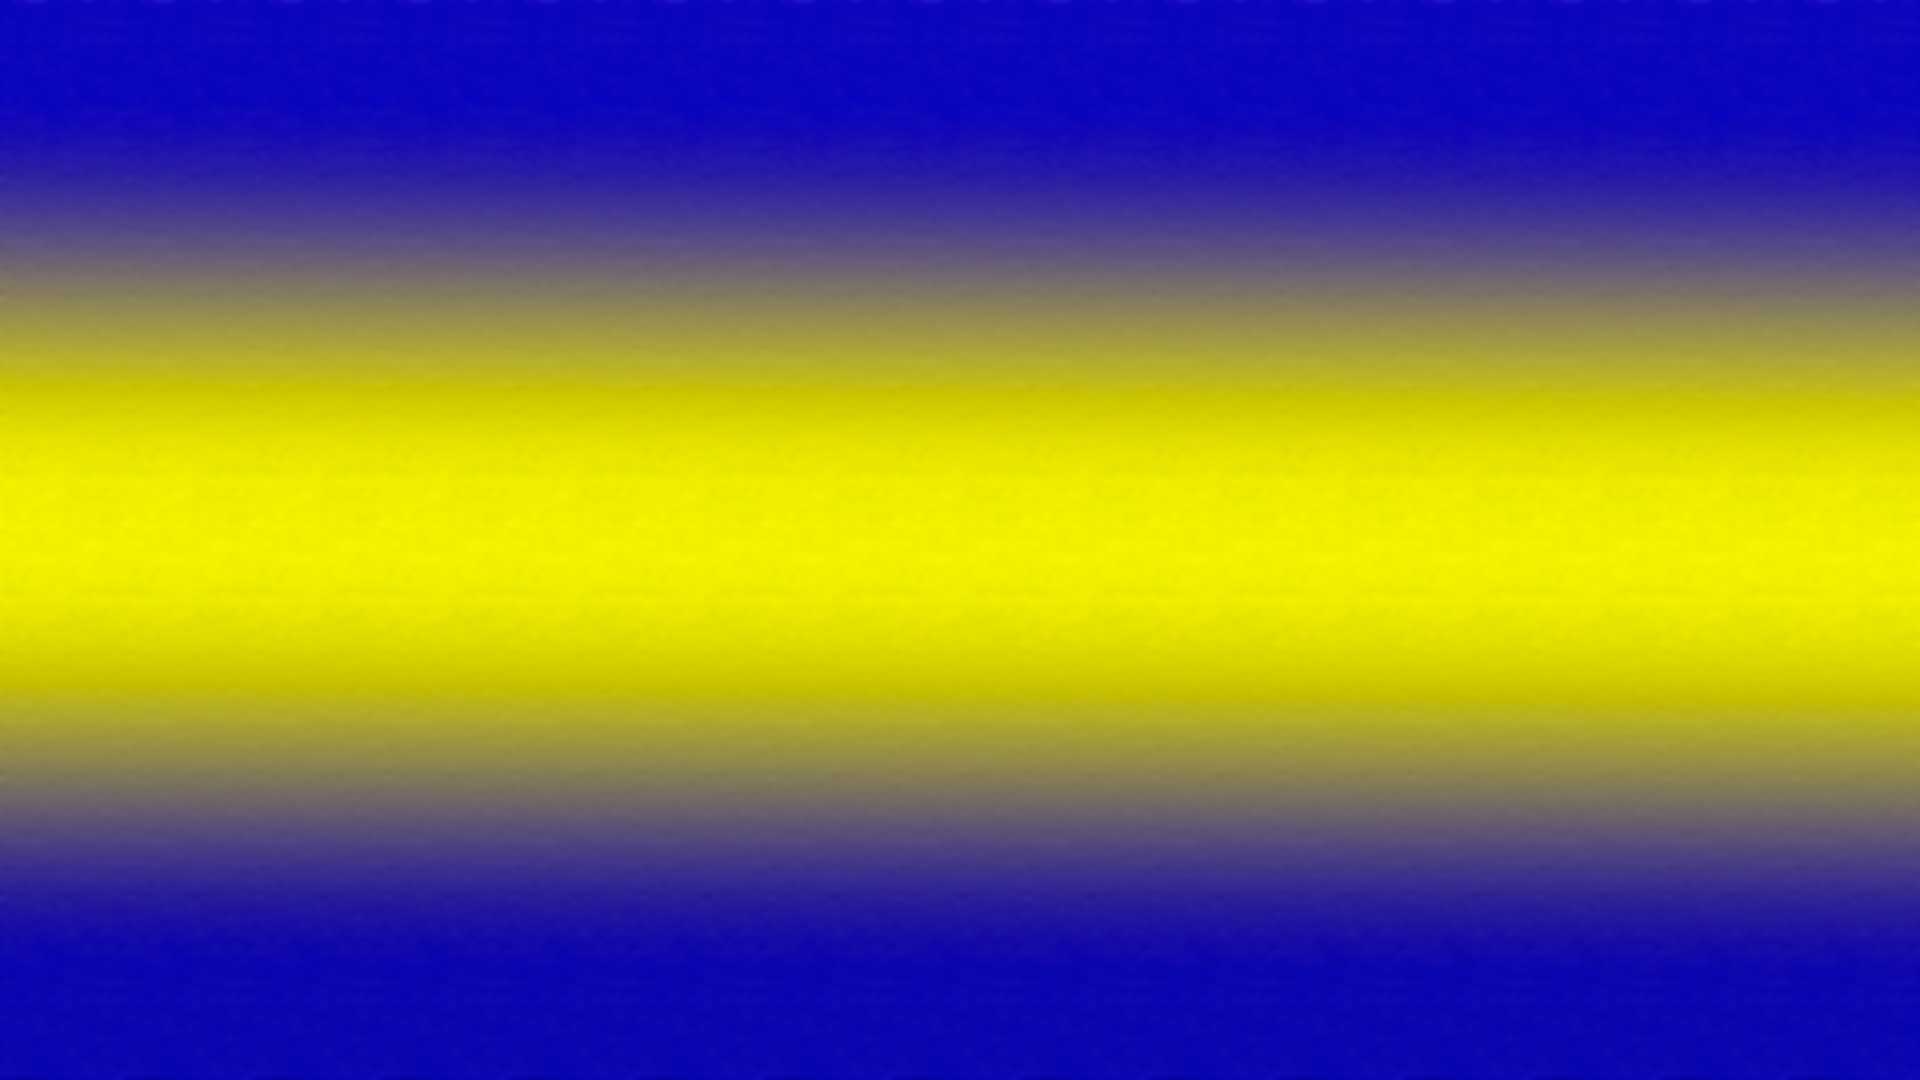 Blue and Yellow - wide 3